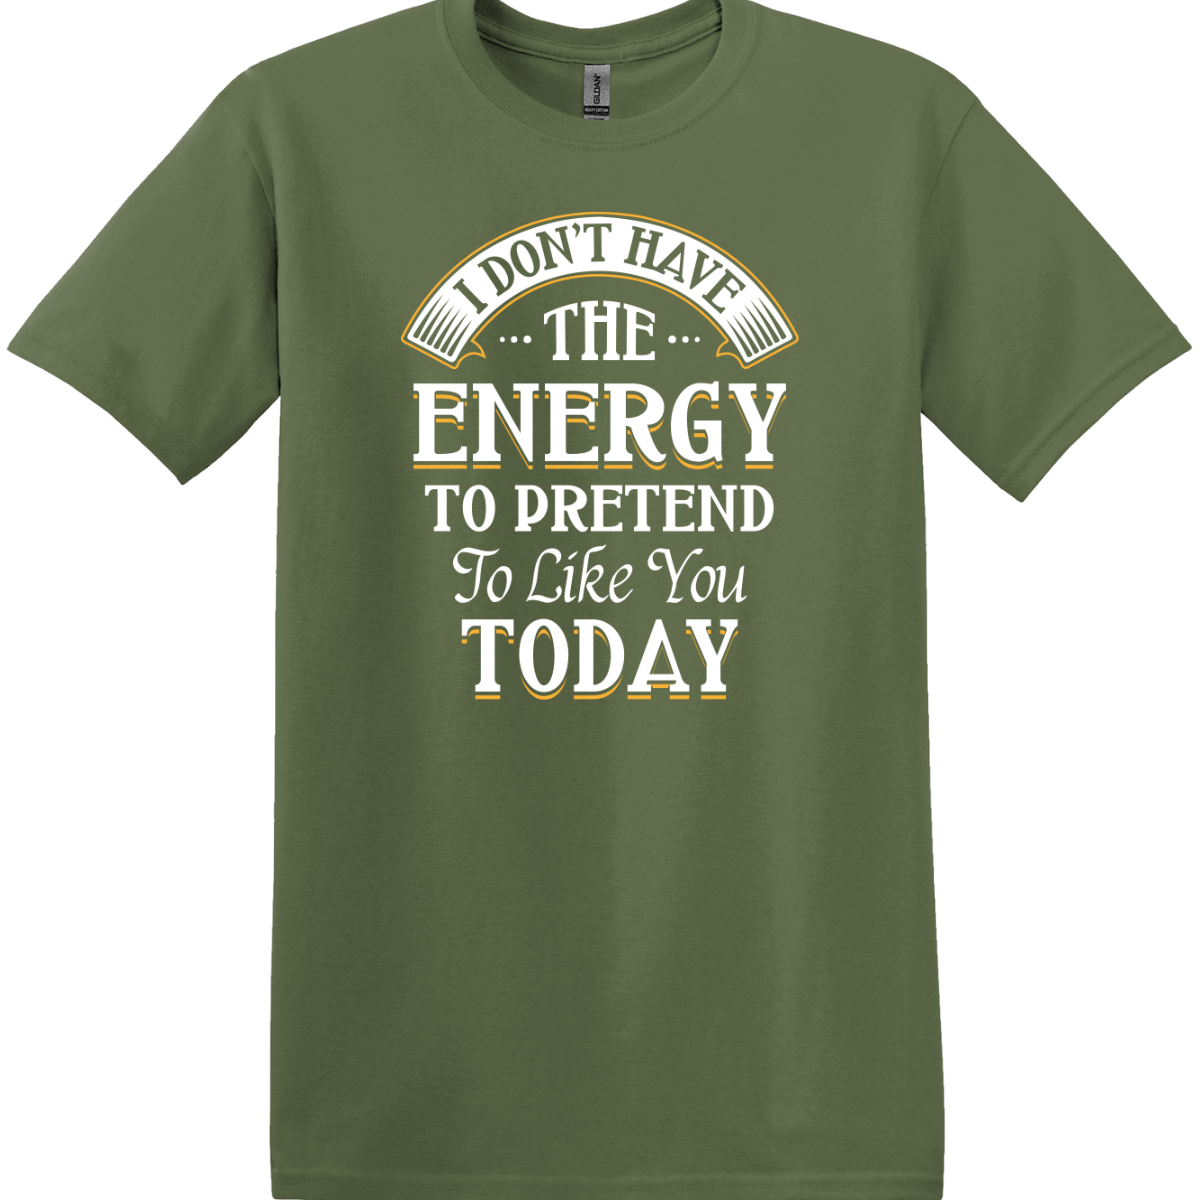 I Don't Have the Energy Tee